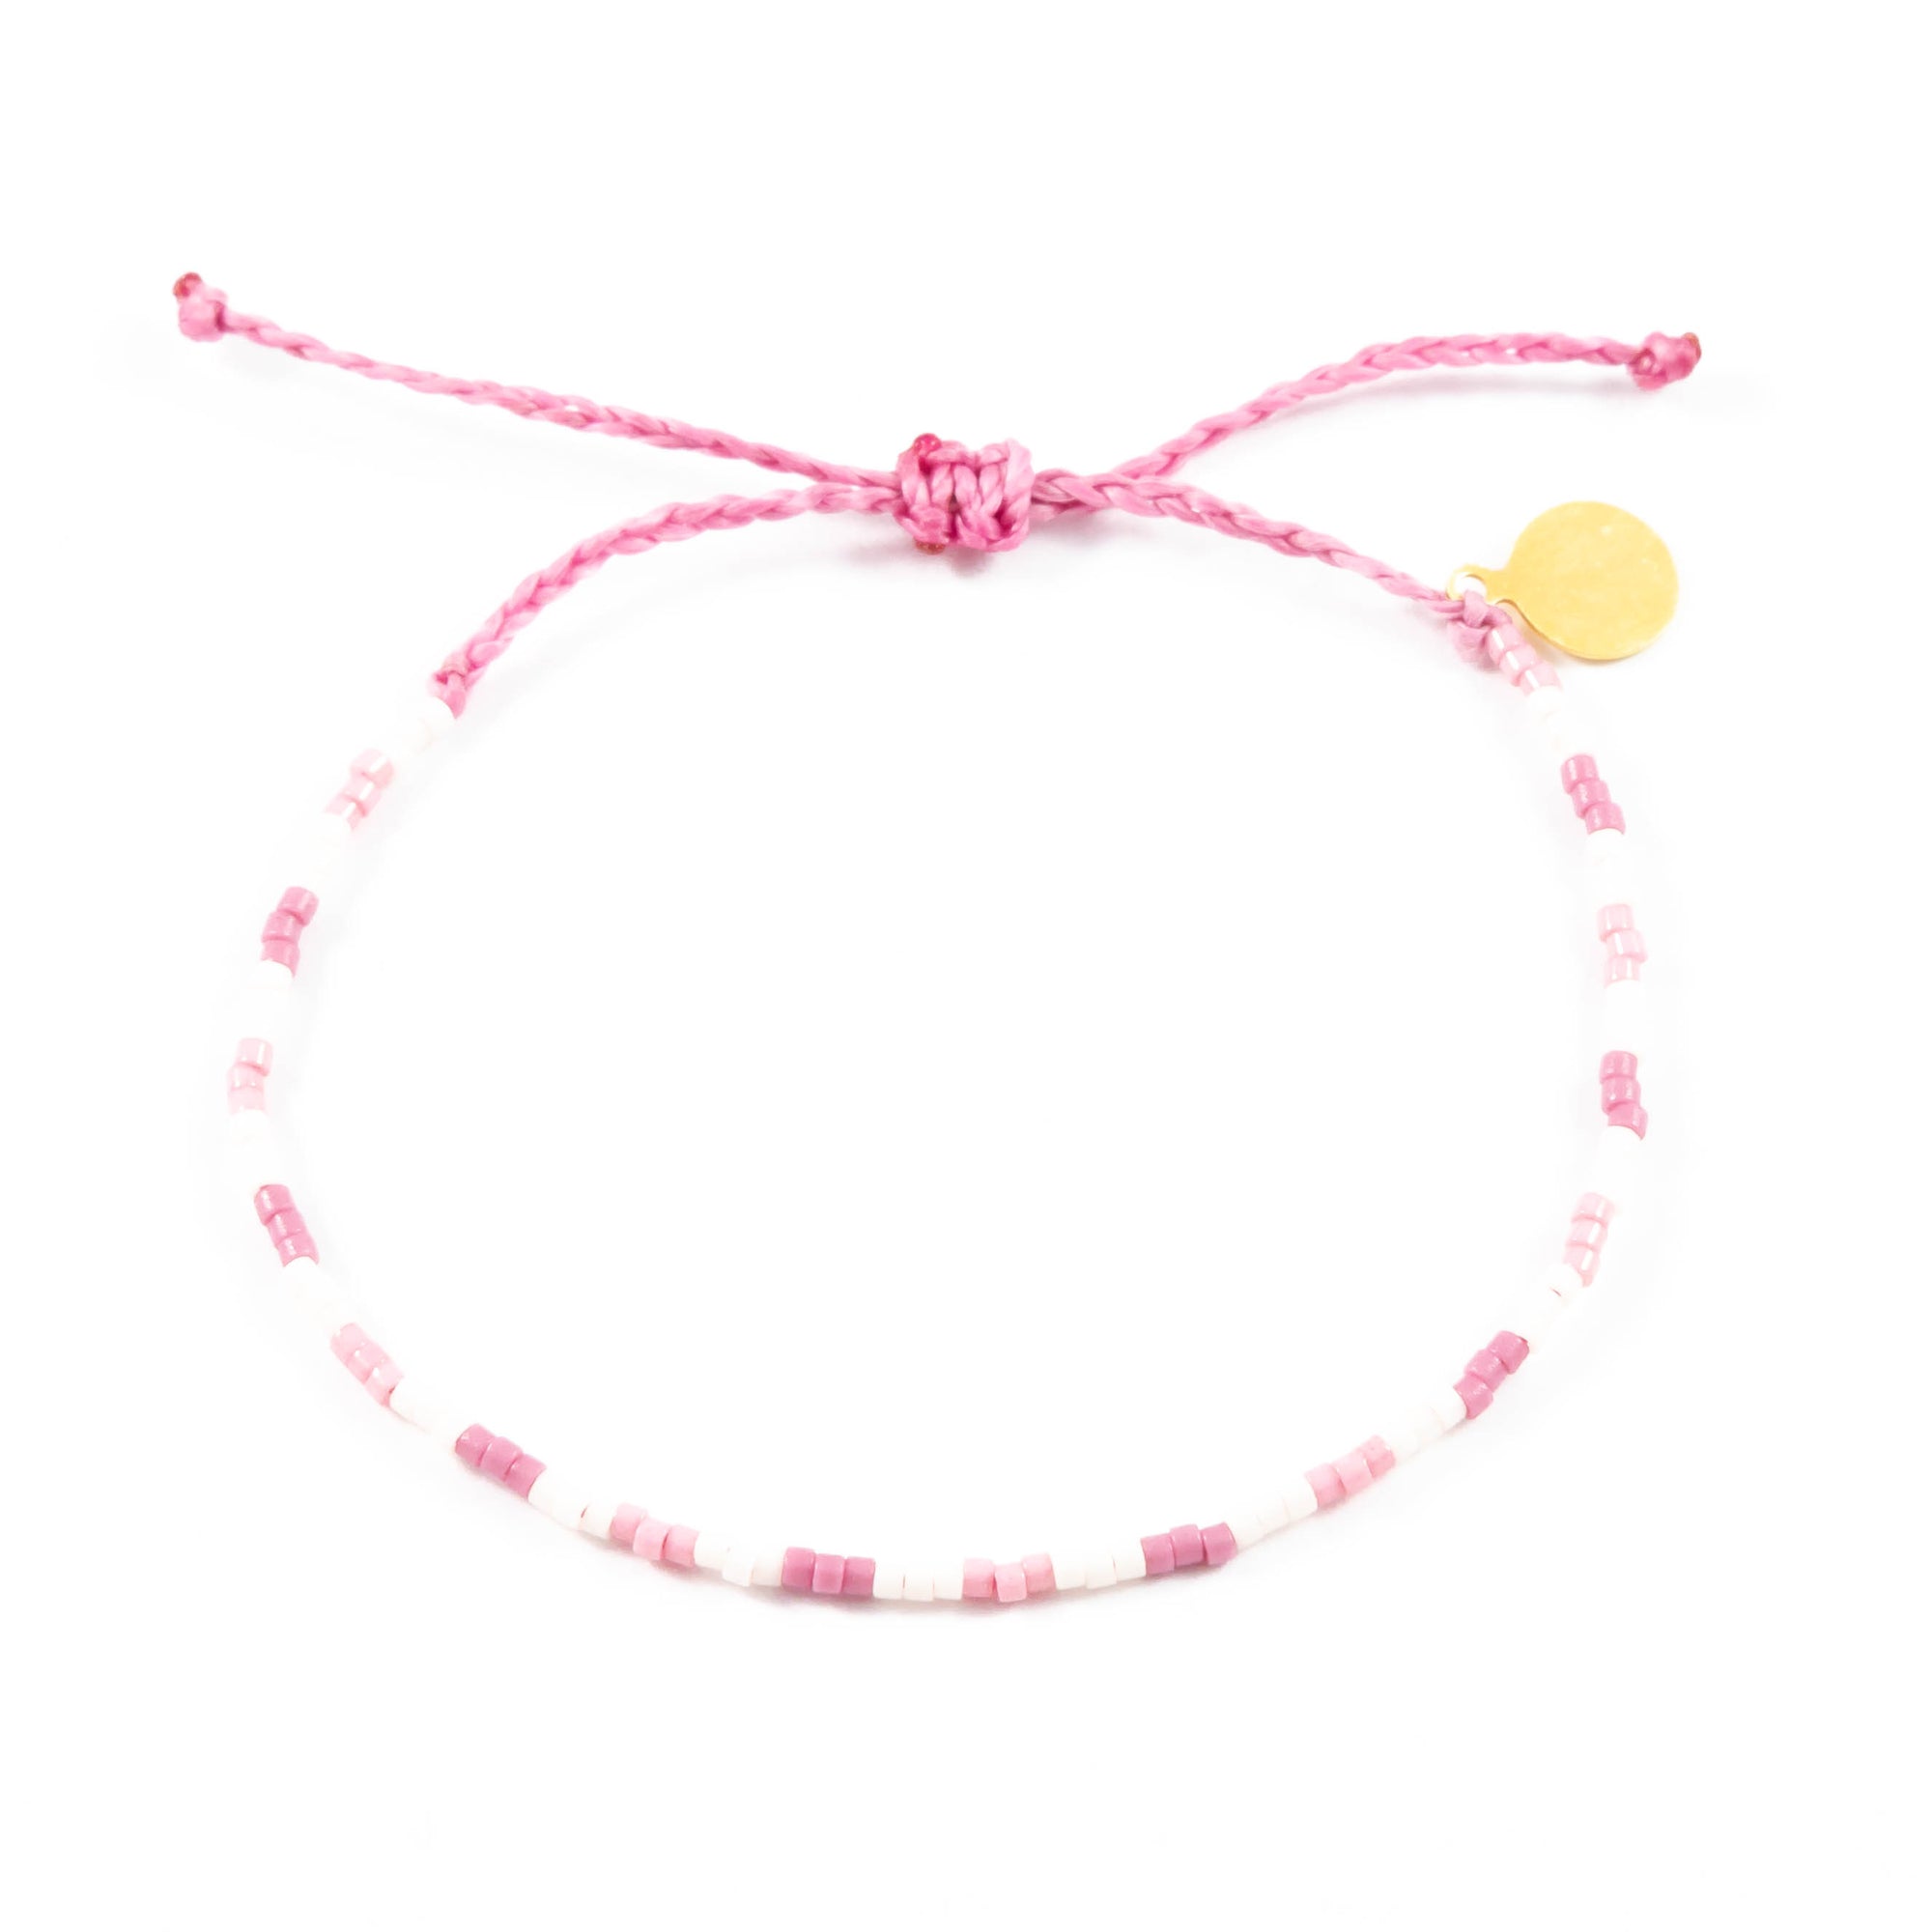 Pinks Shades of Giving Bead Bracelet